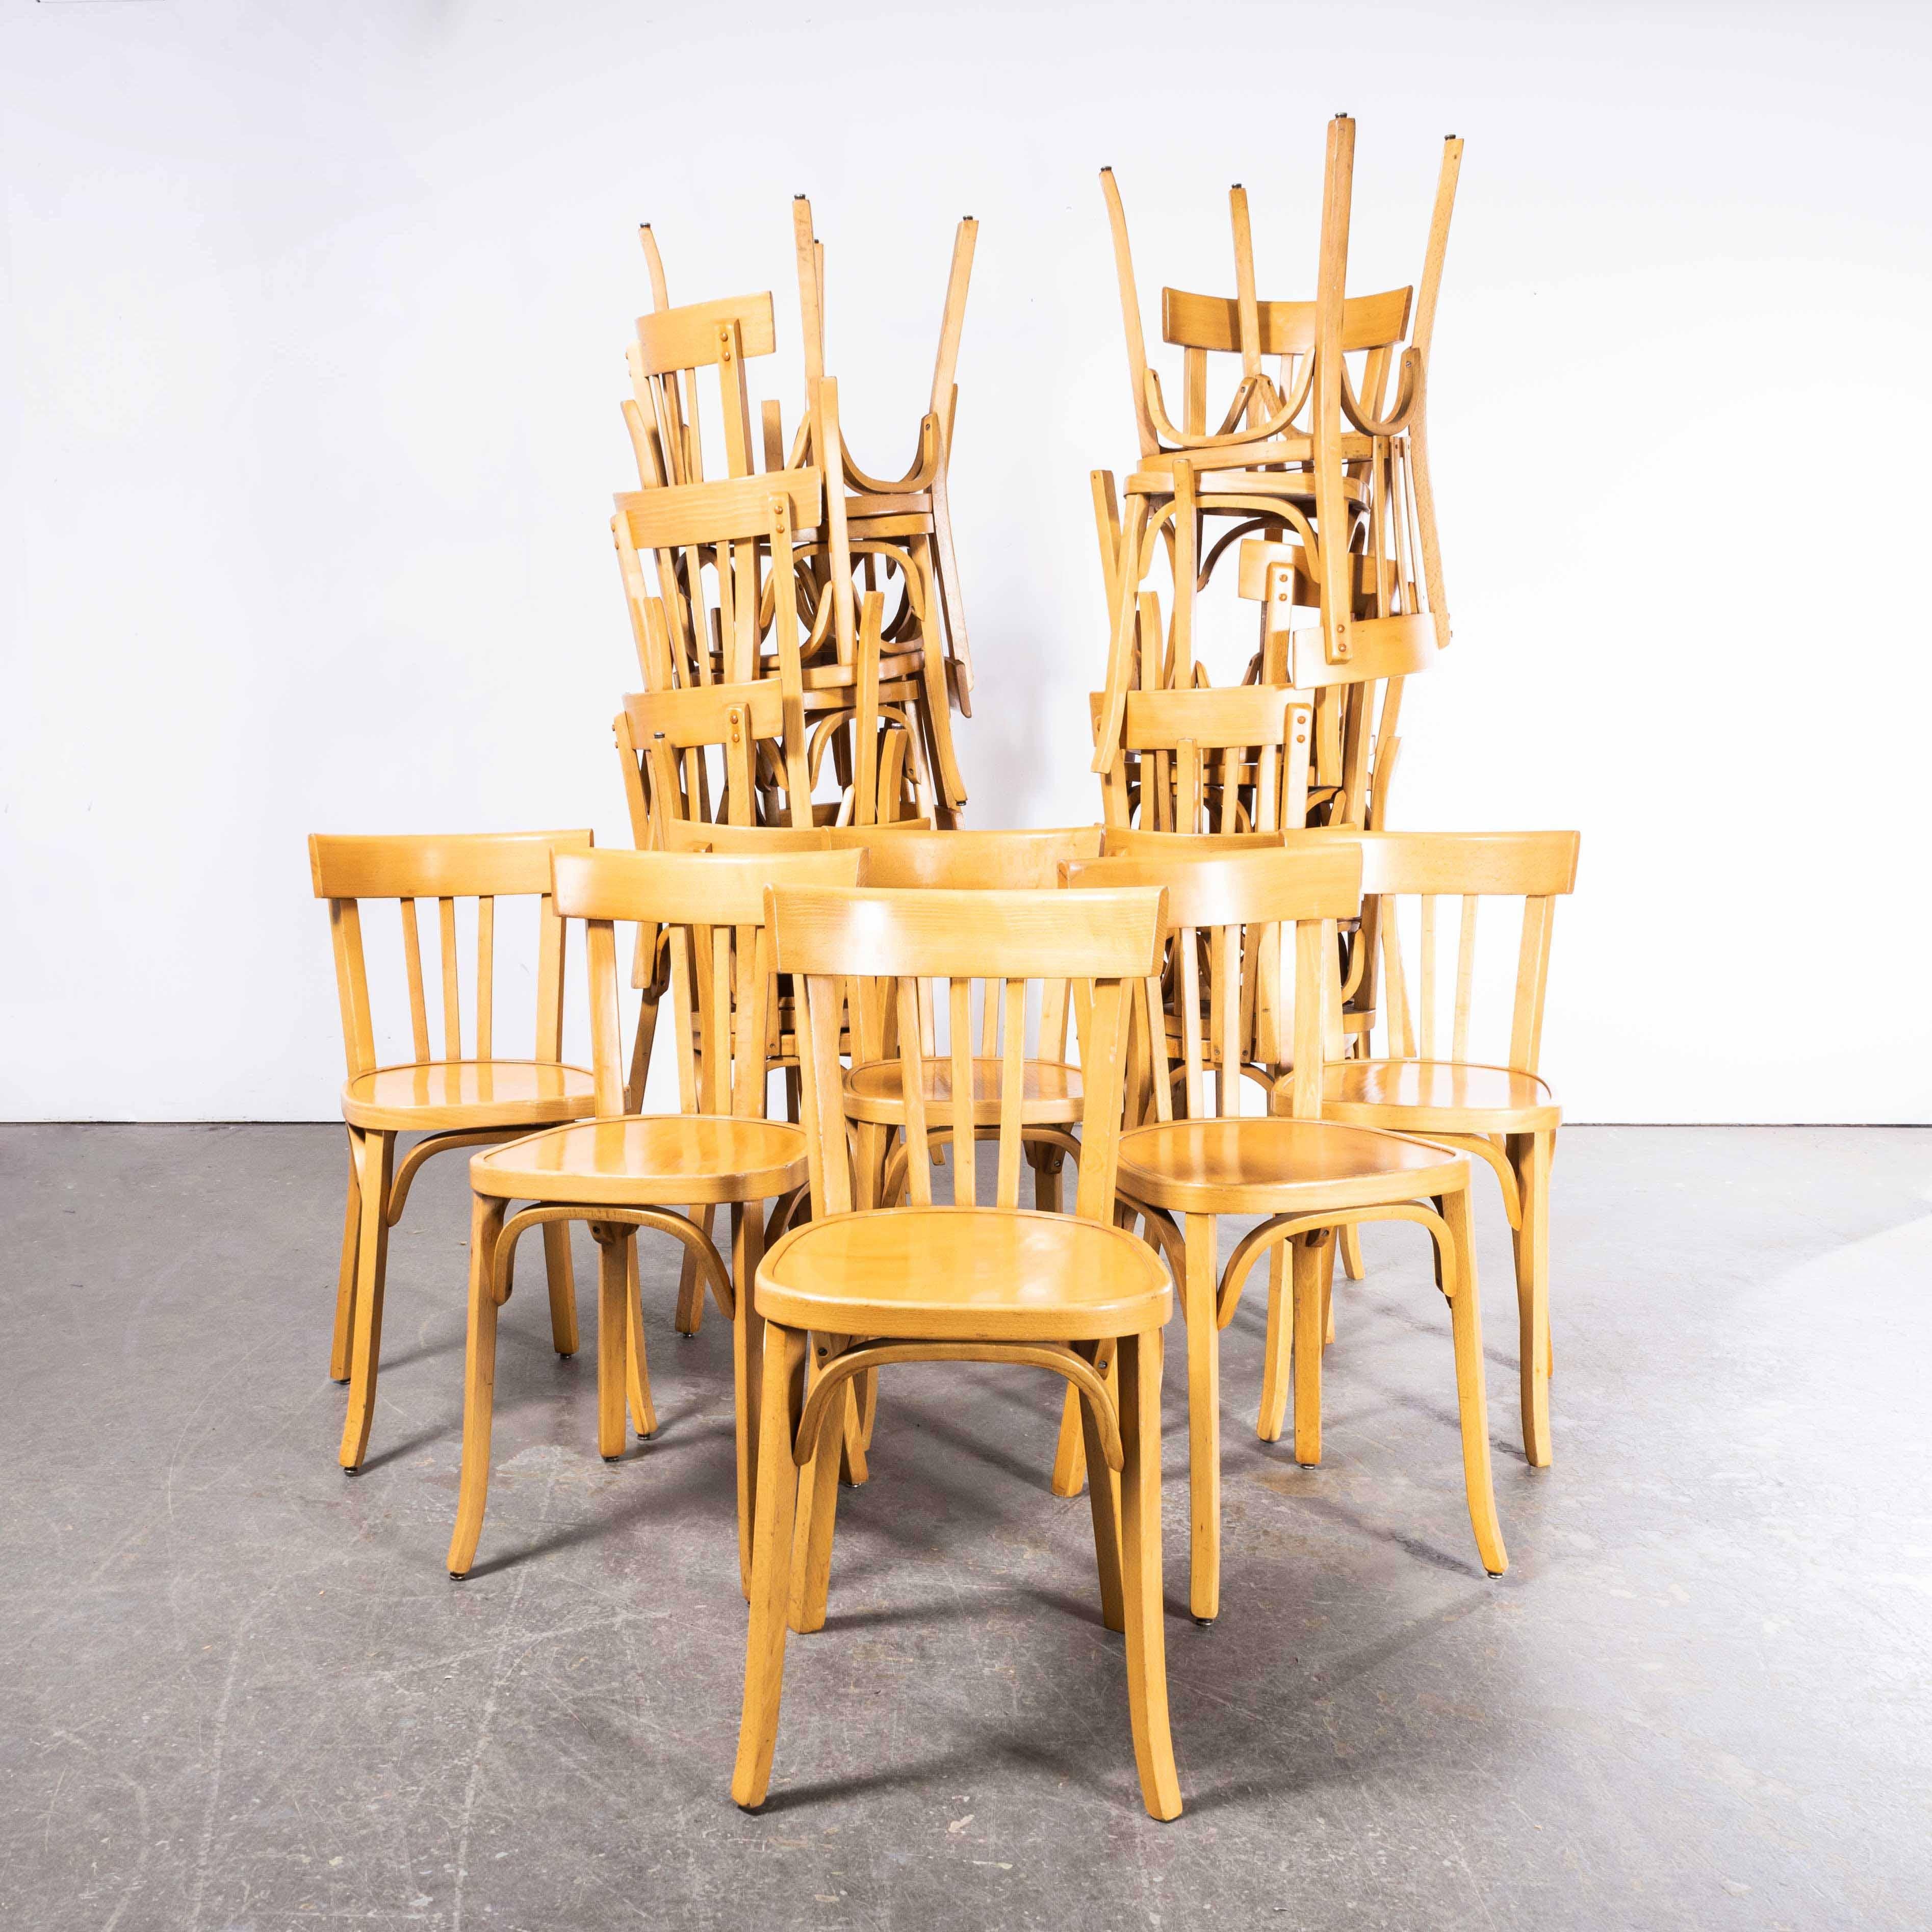 1950’s Baumann Bentwood Tri Back Dining Chair – Bleached – Various Quantities Available
1950’s Baumann Bentwood Tri Back Dining Chair – Honey – Various Quantities Available. Classic Beech bistro chair made in France by the maker Baumann. Baumann is